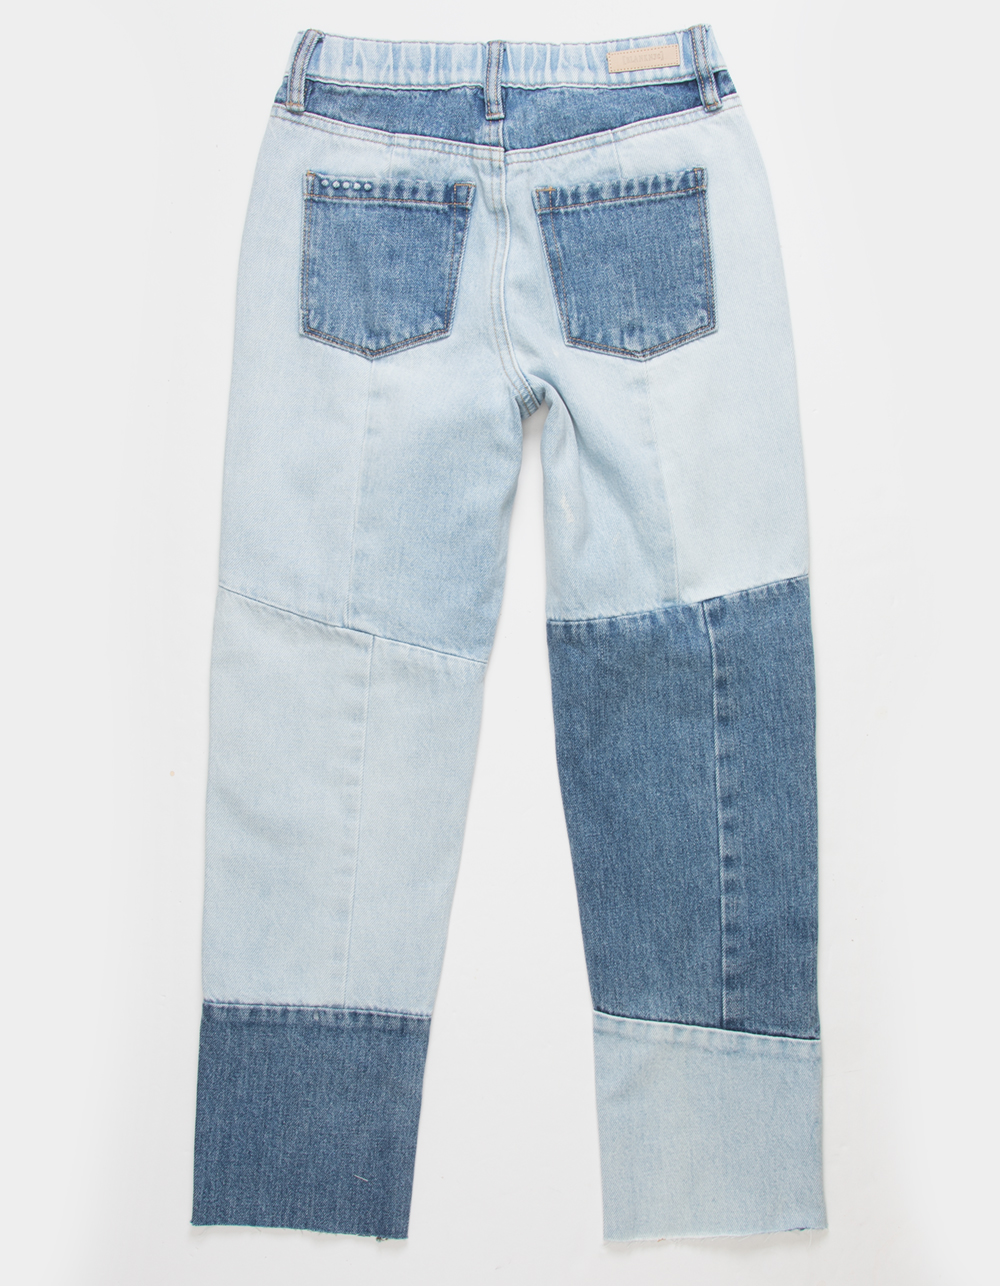 NYC Patchwork Girls Jeans - WASH |